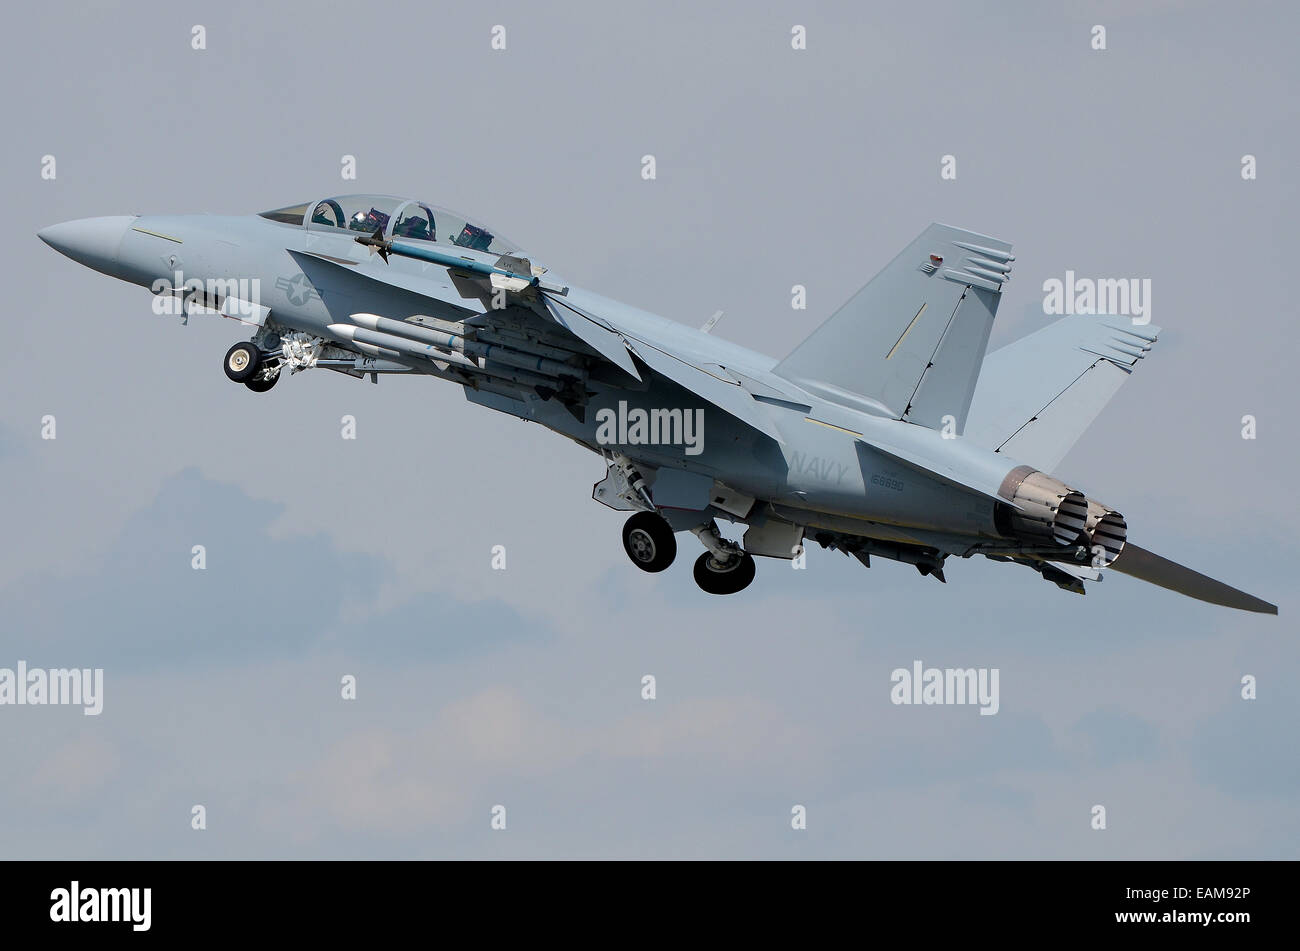 The Boeing F/A-18E Super Hornet and related twin-seat F/A-18F are twin-engine carrier-capable multirole fighter aircraft. US Marine Corps jet plane Stock Photo